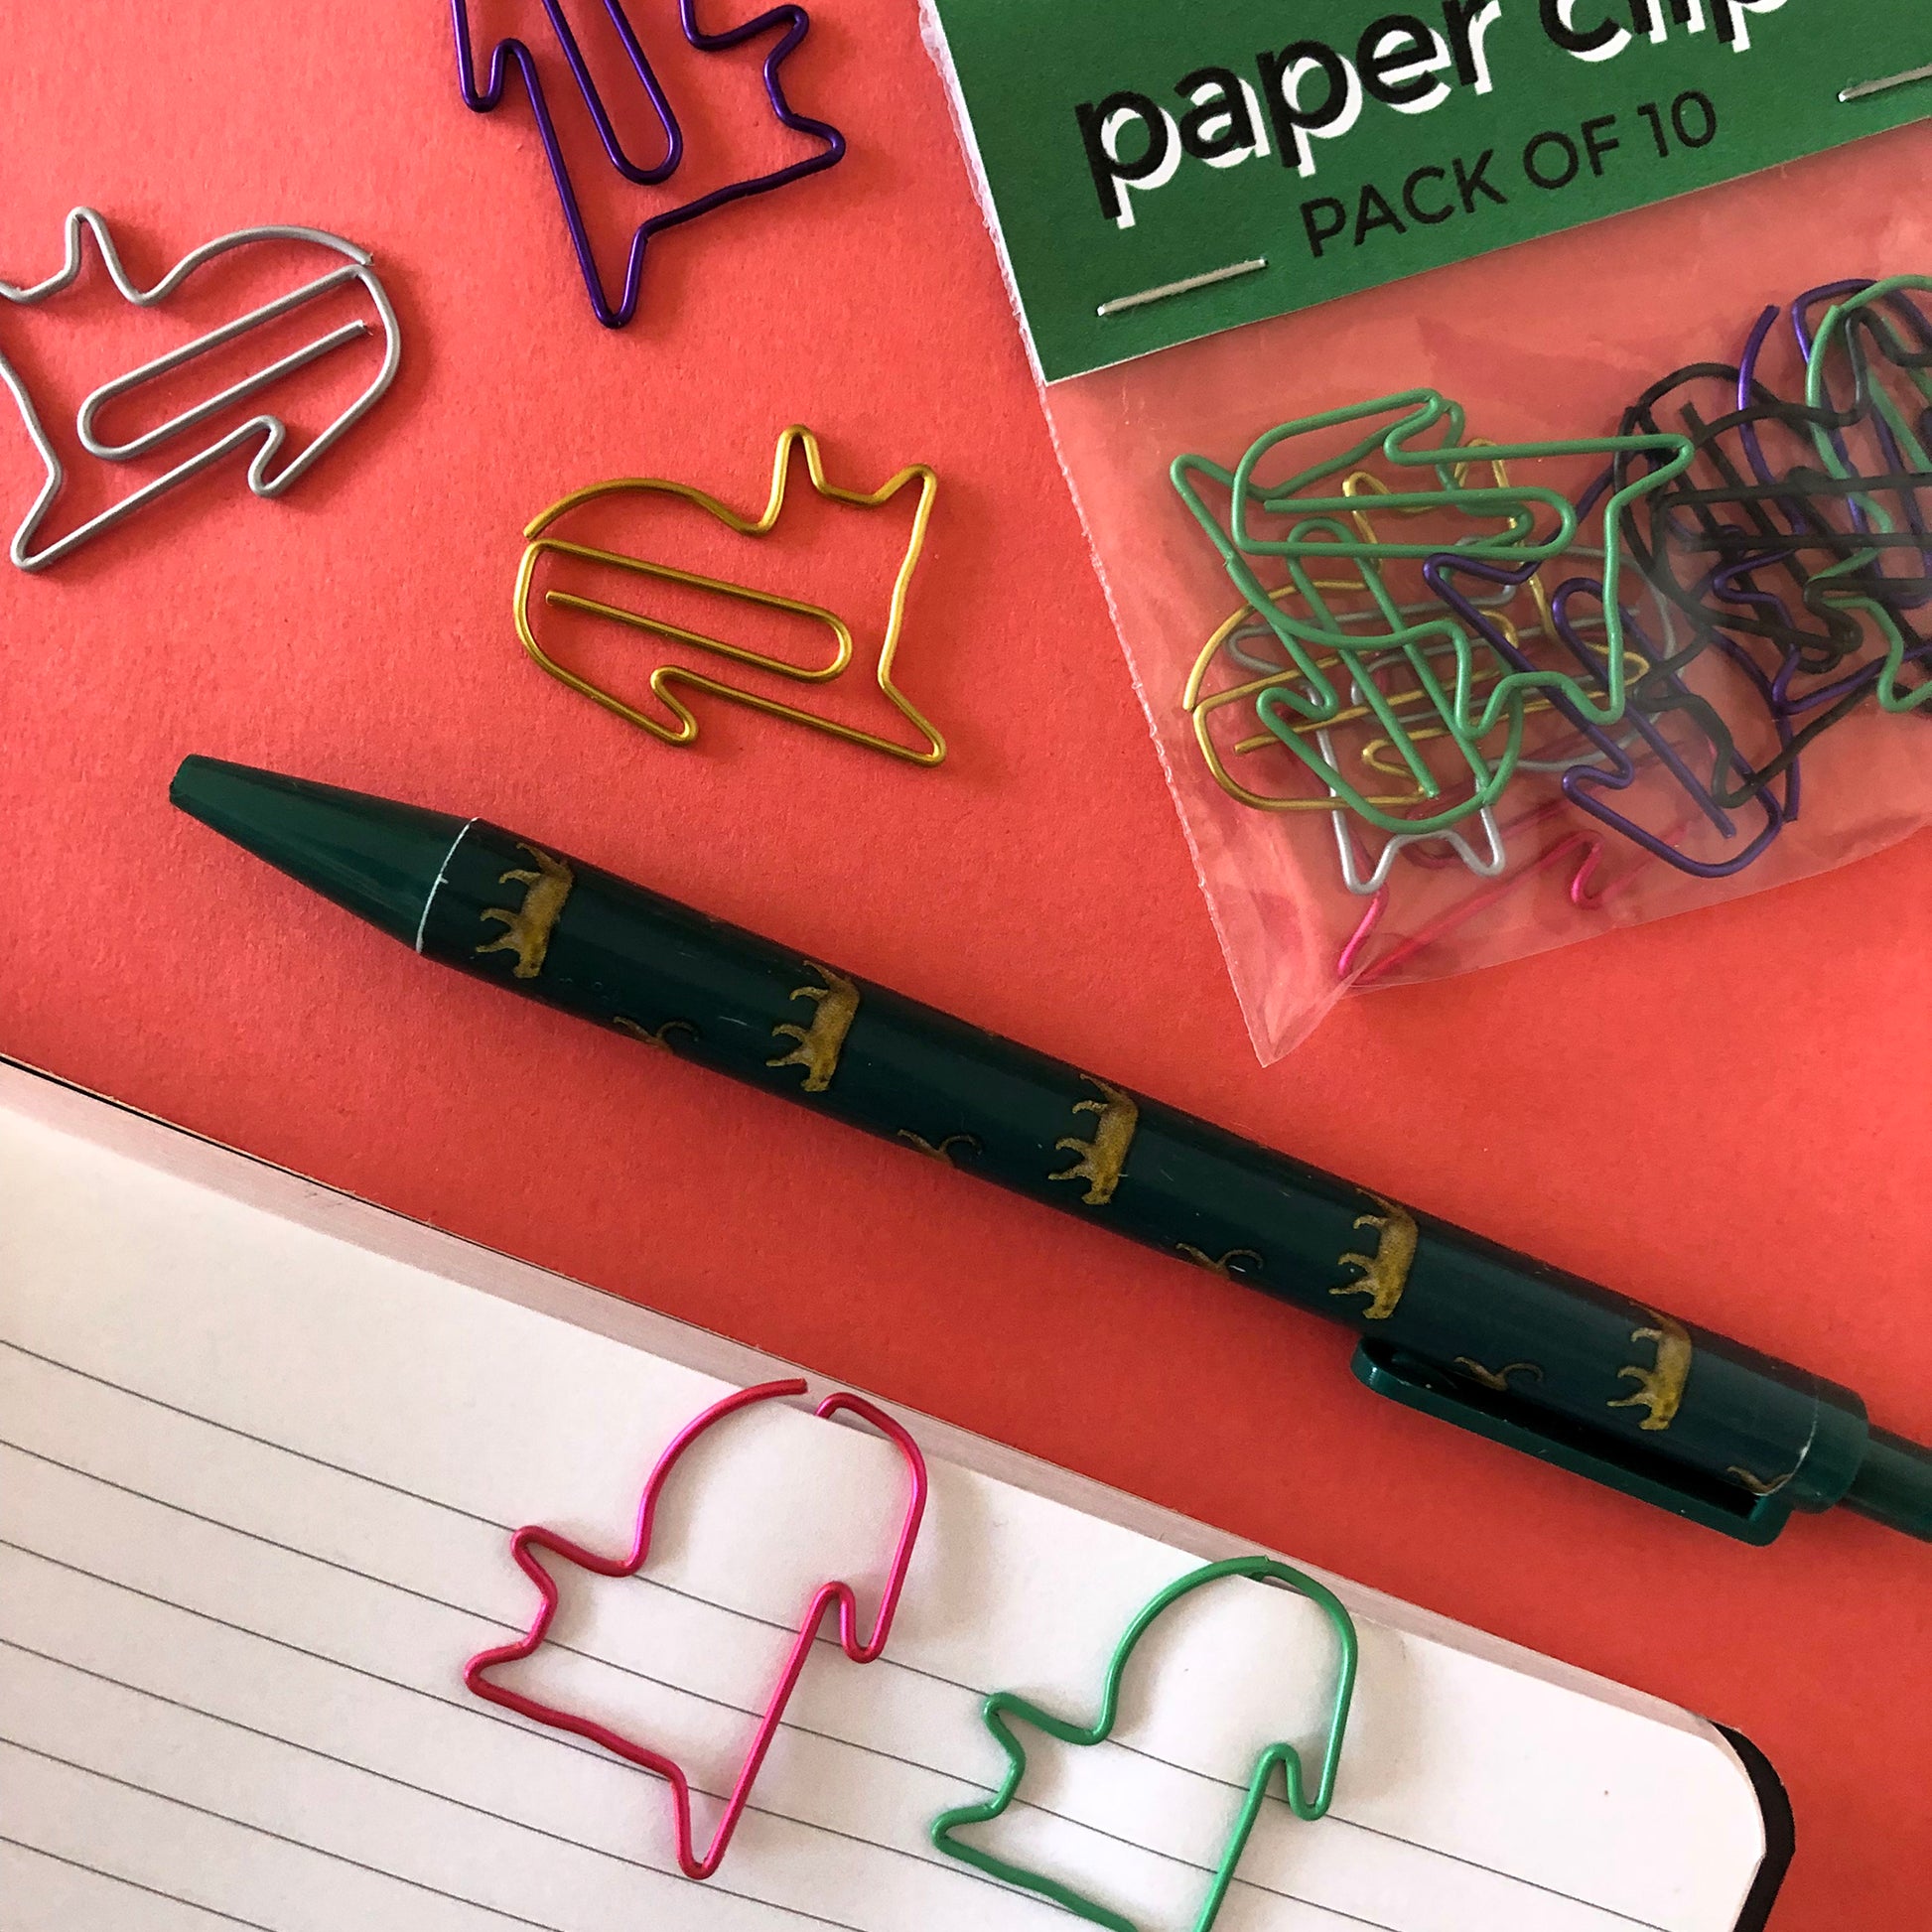 Image shows a set of cute and colourful, cat shaped paperclips.